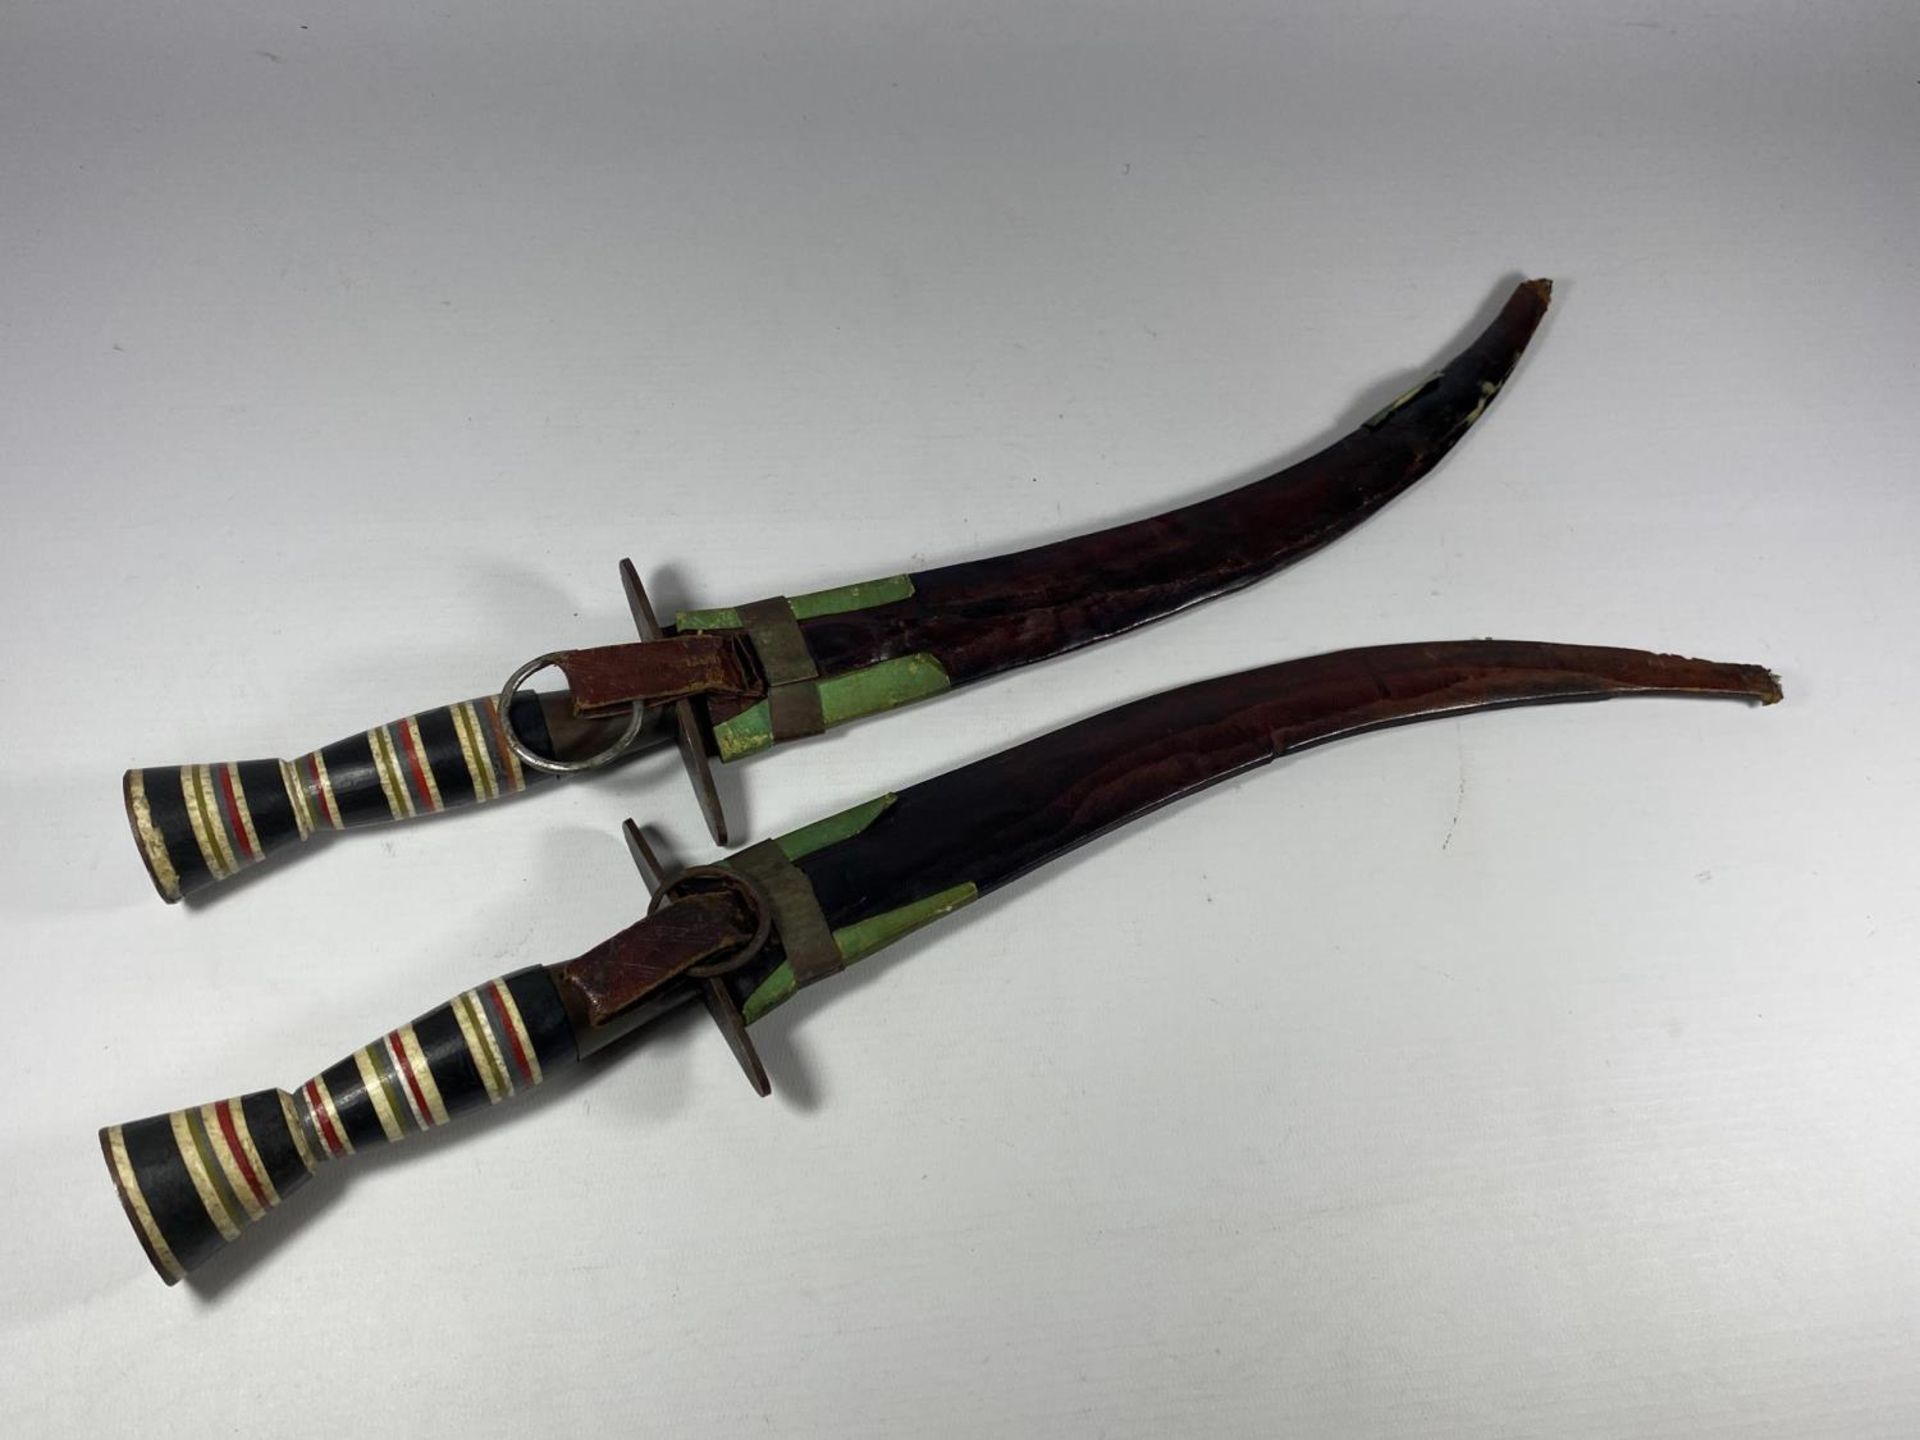 A PAIR OF EGYPTIAN / MIDDLE EASTERN CEREMONIAL DAGGERS - Image 3 of 4